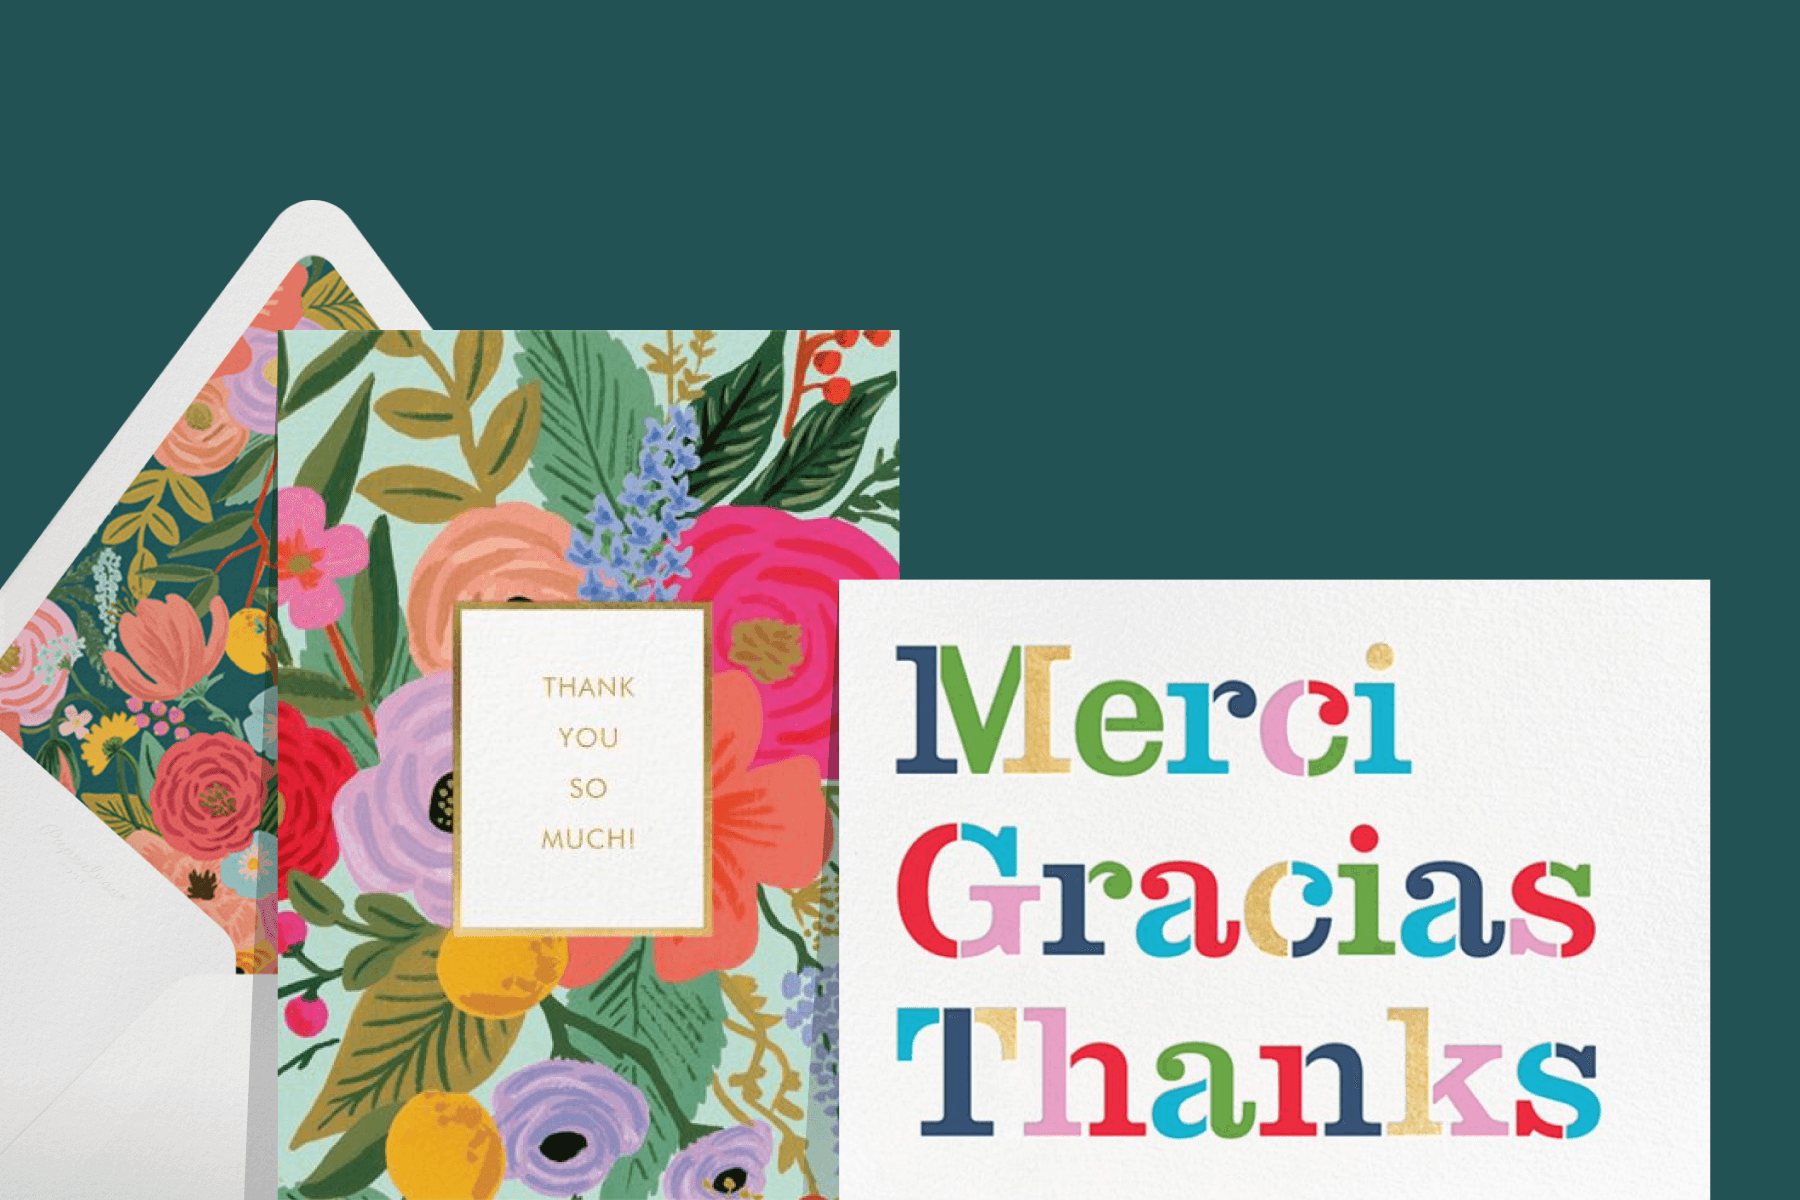 Two thank you cards. The one on the left has bright illustrations of mixed flowers with a matching envelope. The one on the right says “Merci, Gracias, Thanks” in rainbow text.